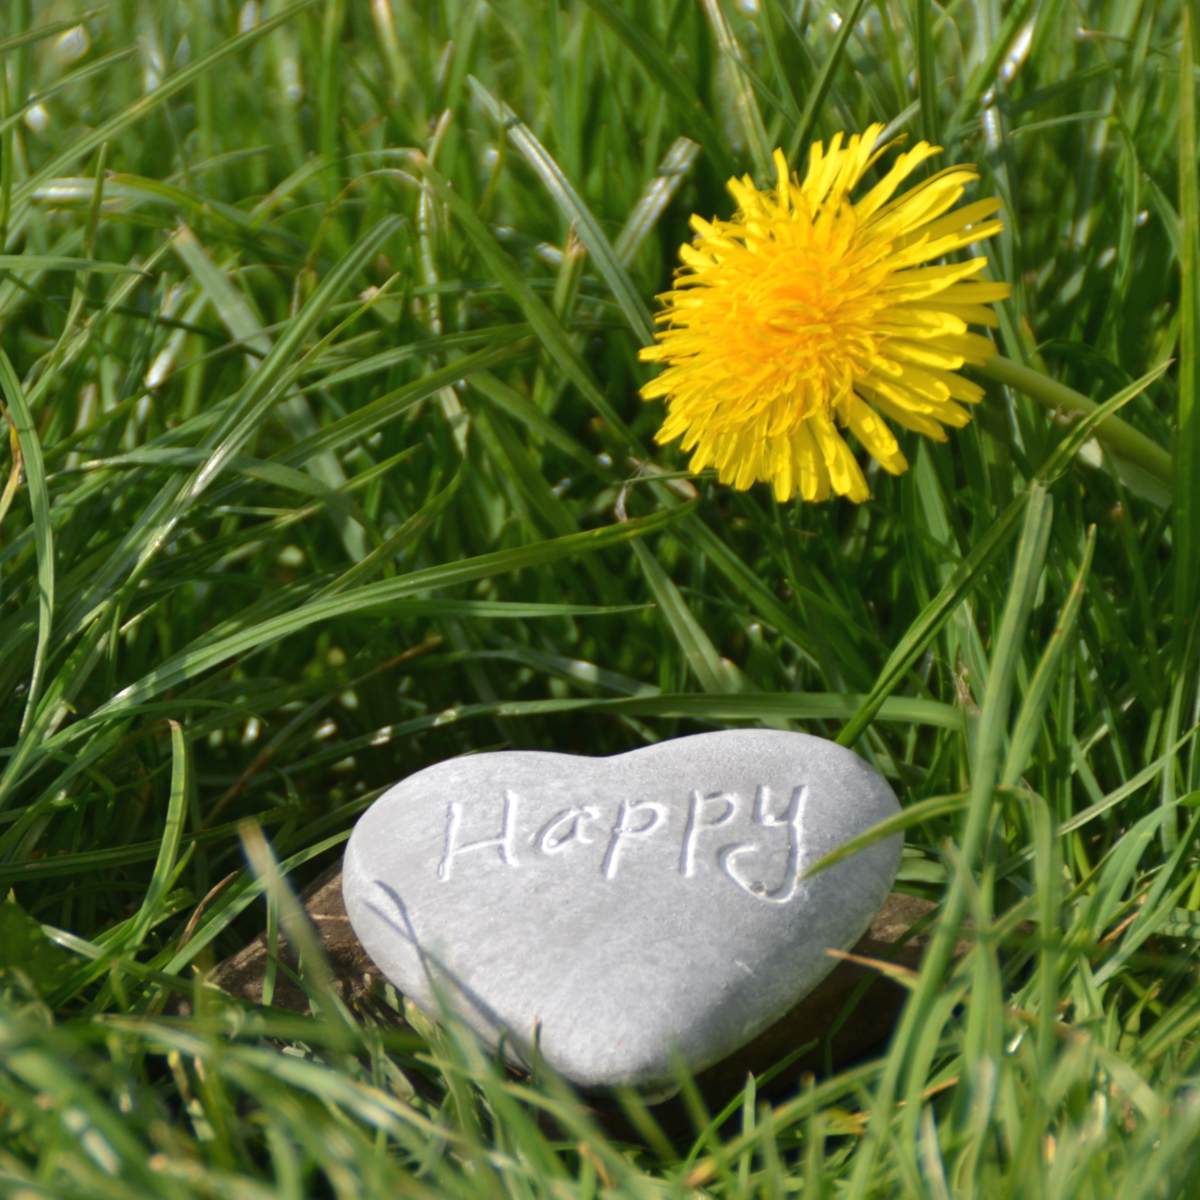 Dandelion in grass with heart-shaped stone marked with "happy".